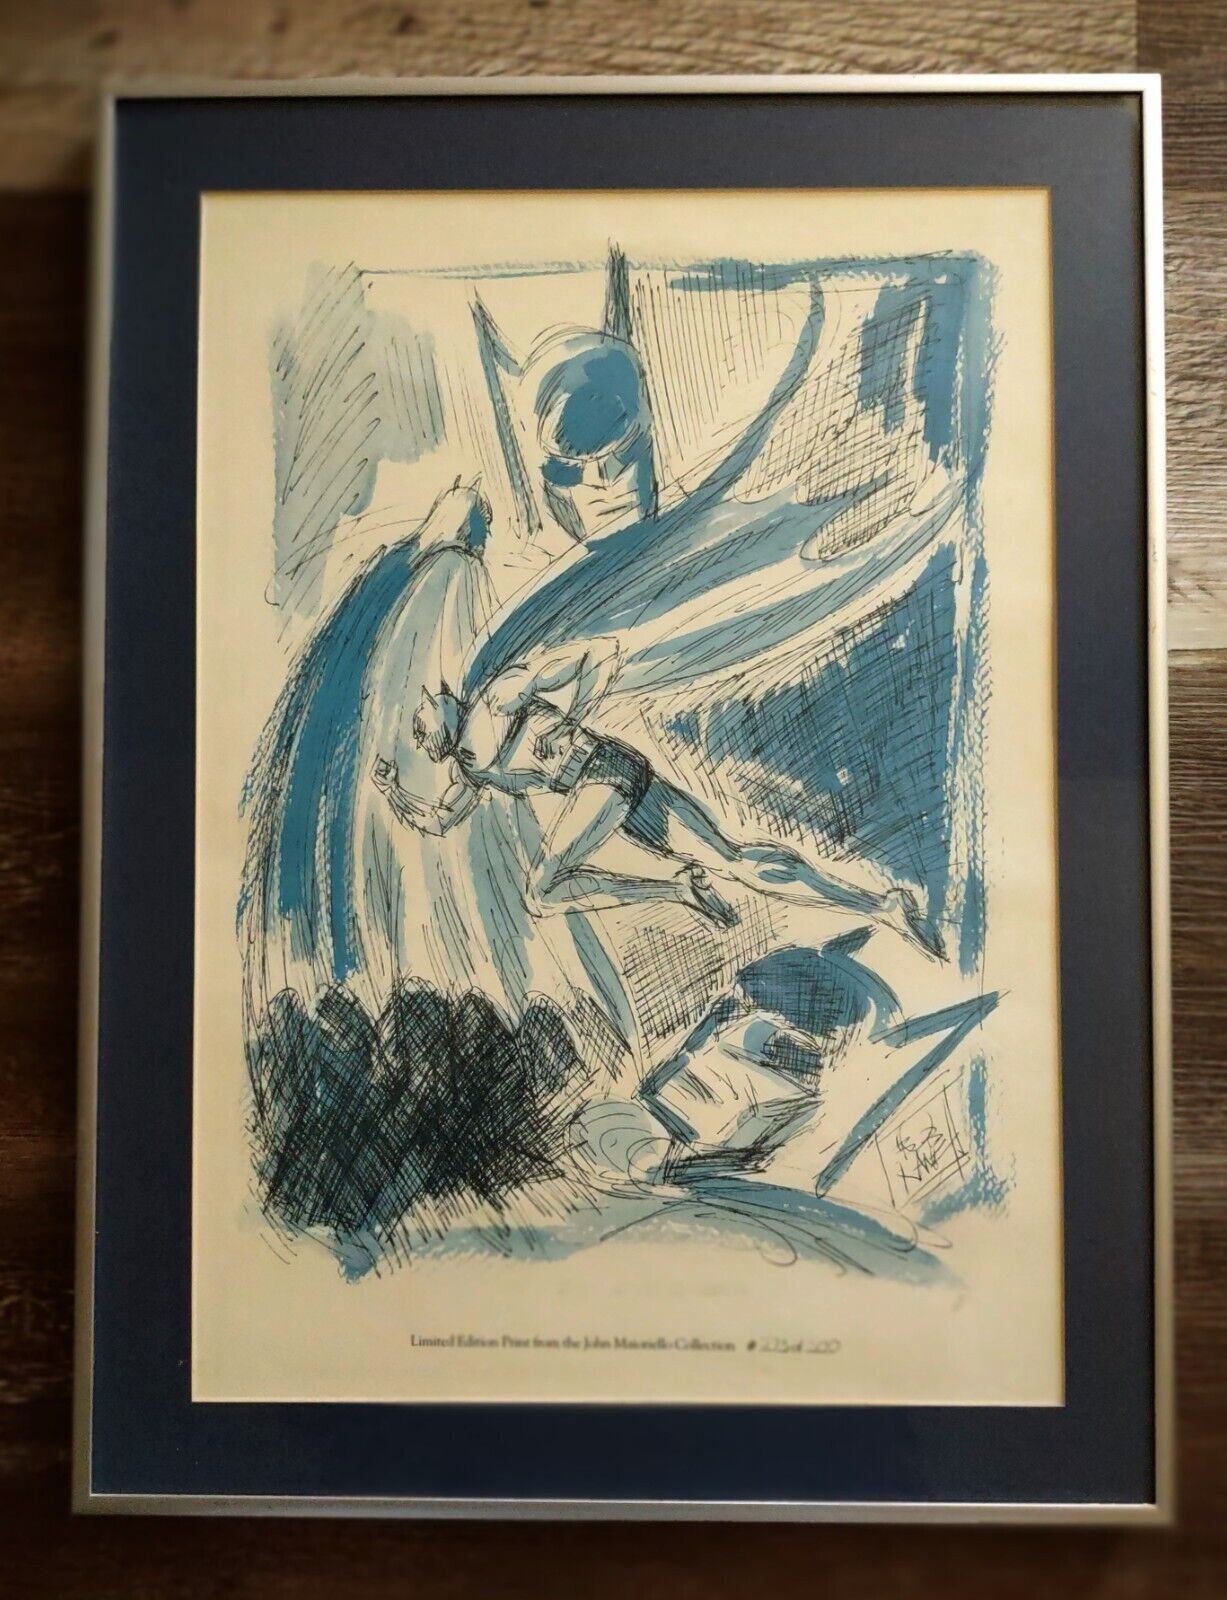 Bob Kane signed batman limited edition print from Maiorello Collection 273/500 